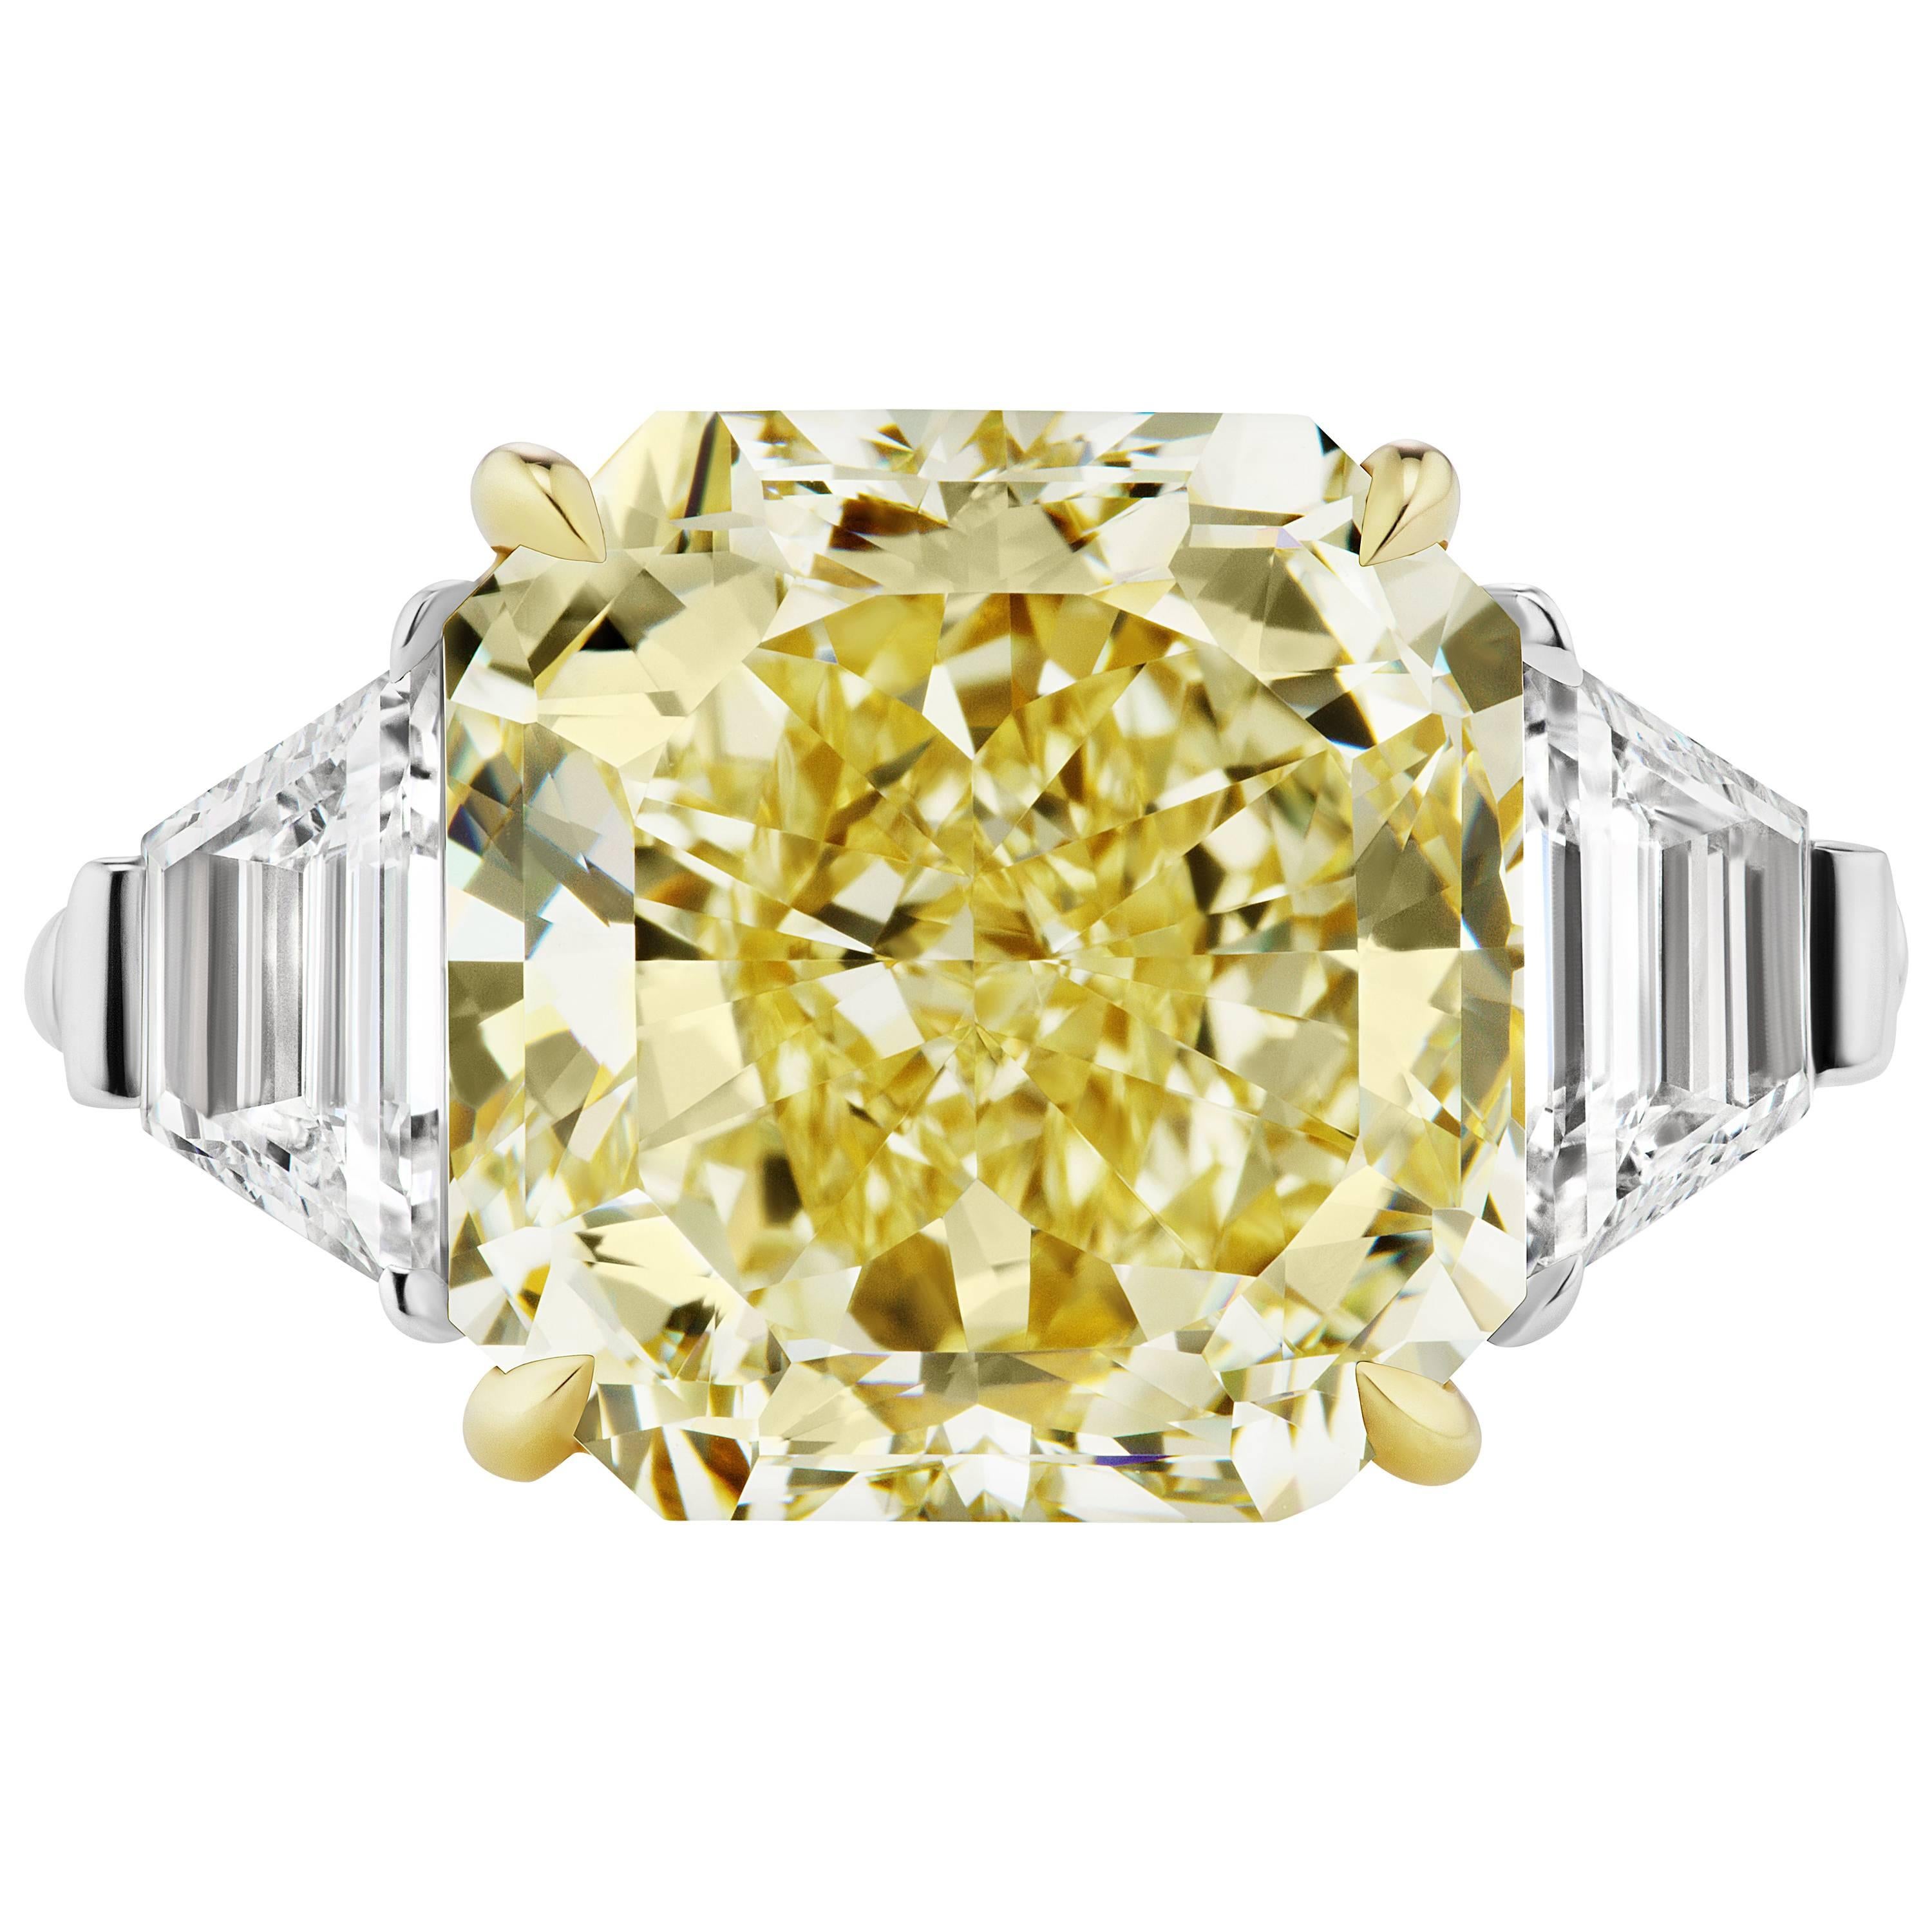 Scarselli GIA Certified 8 Carats Yellow Radiant Cut Diamond Engagement Ring